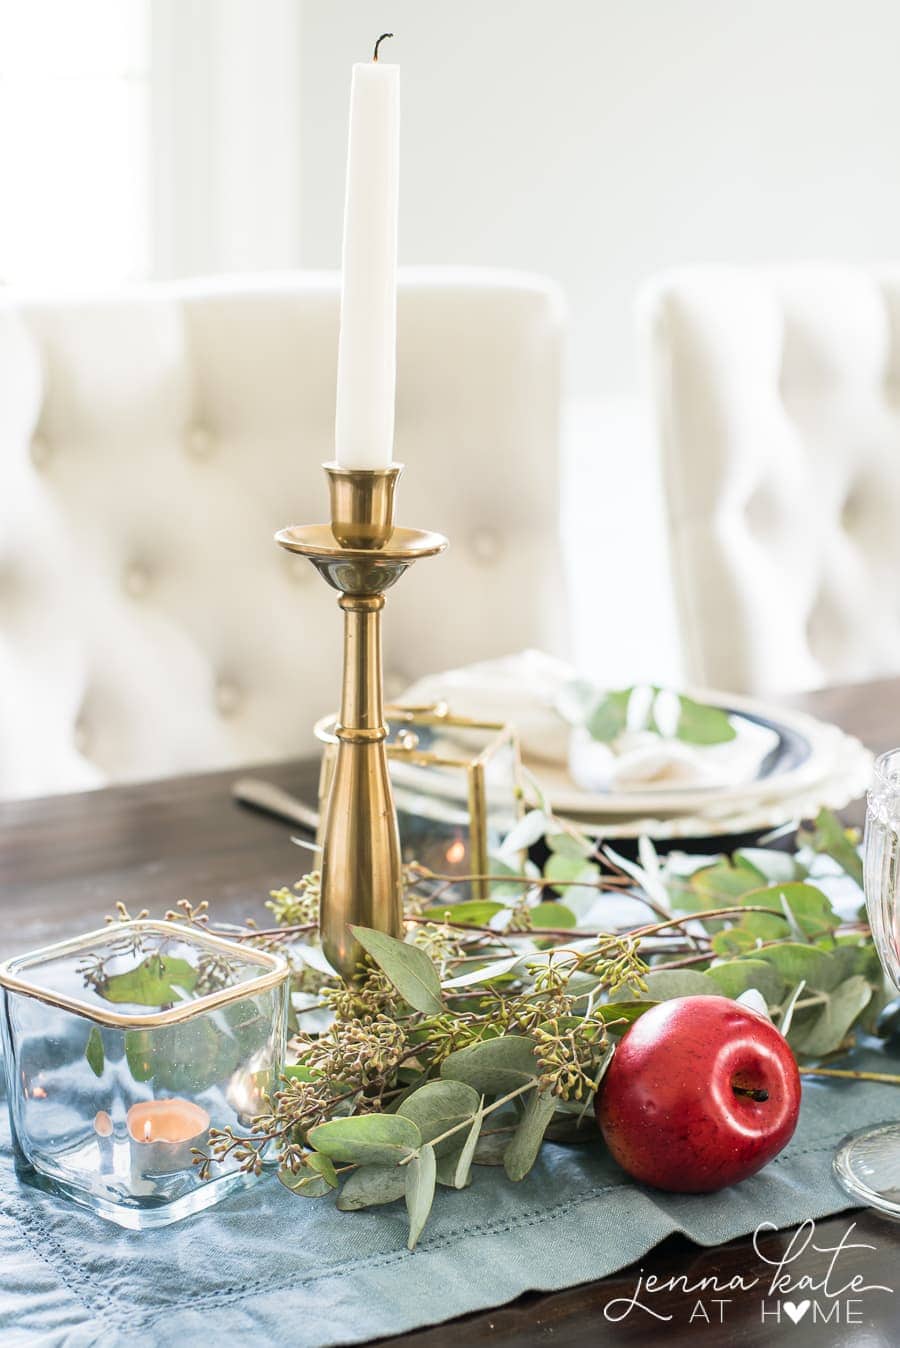 Apples and eucalyptus is a simple combination for natural fall decorating